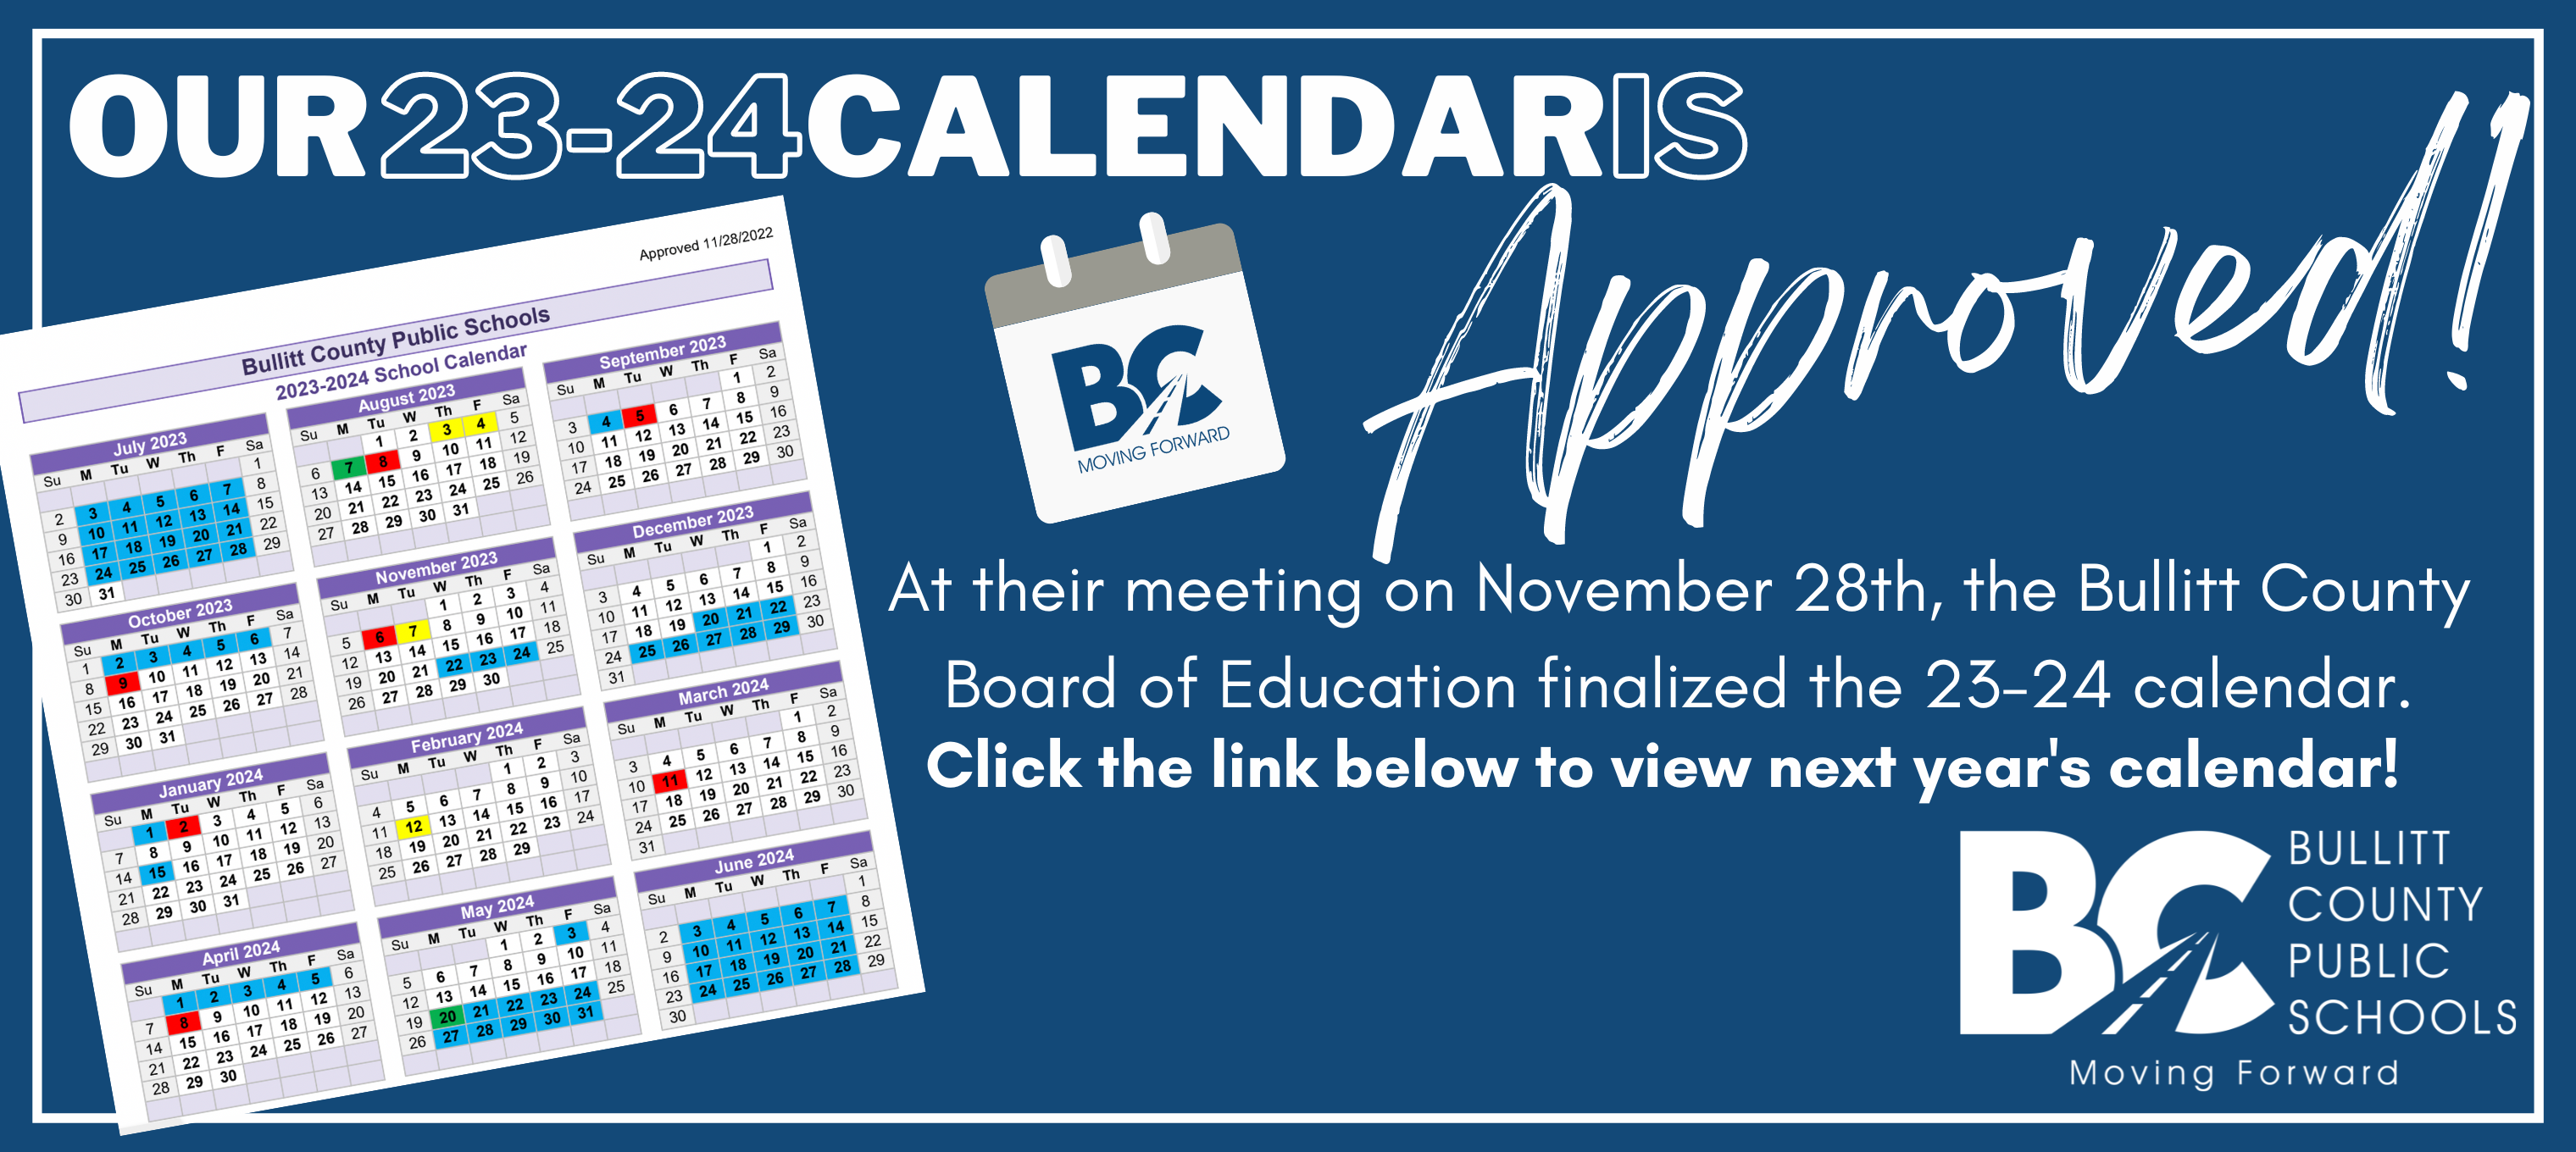 23-24 Calendar is Approved!